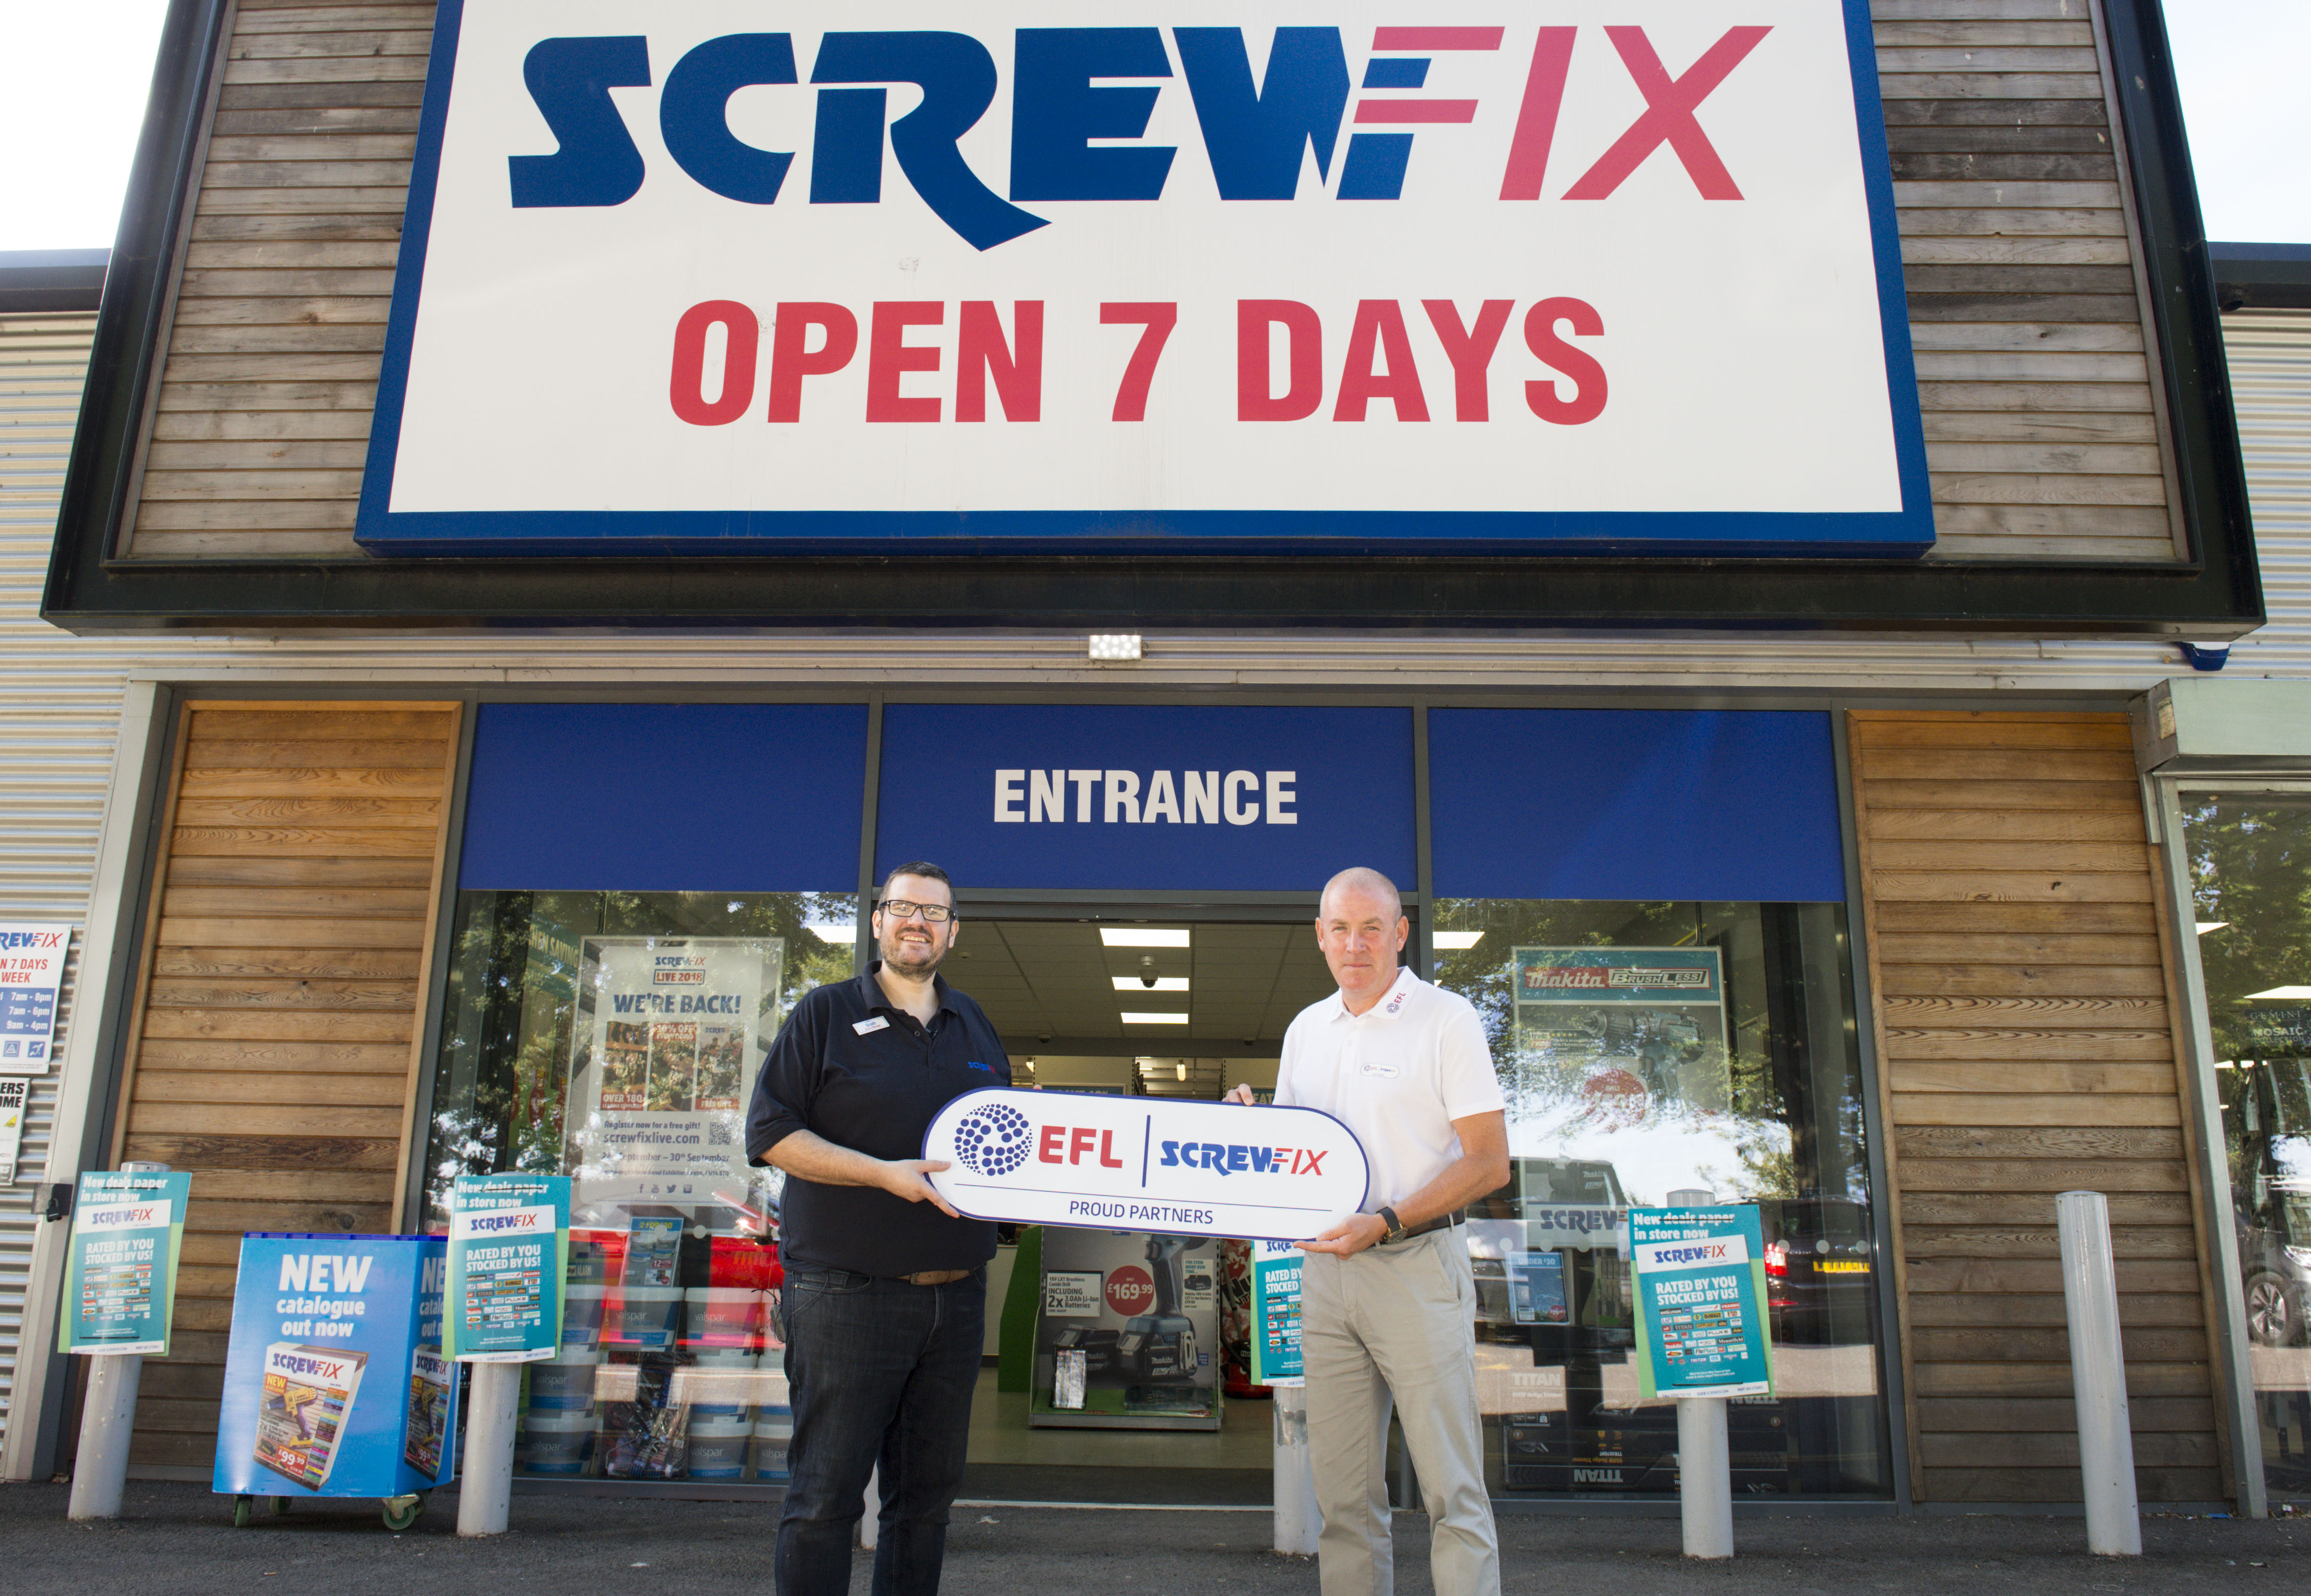 Screwfix Signs as an official partner of the EFL